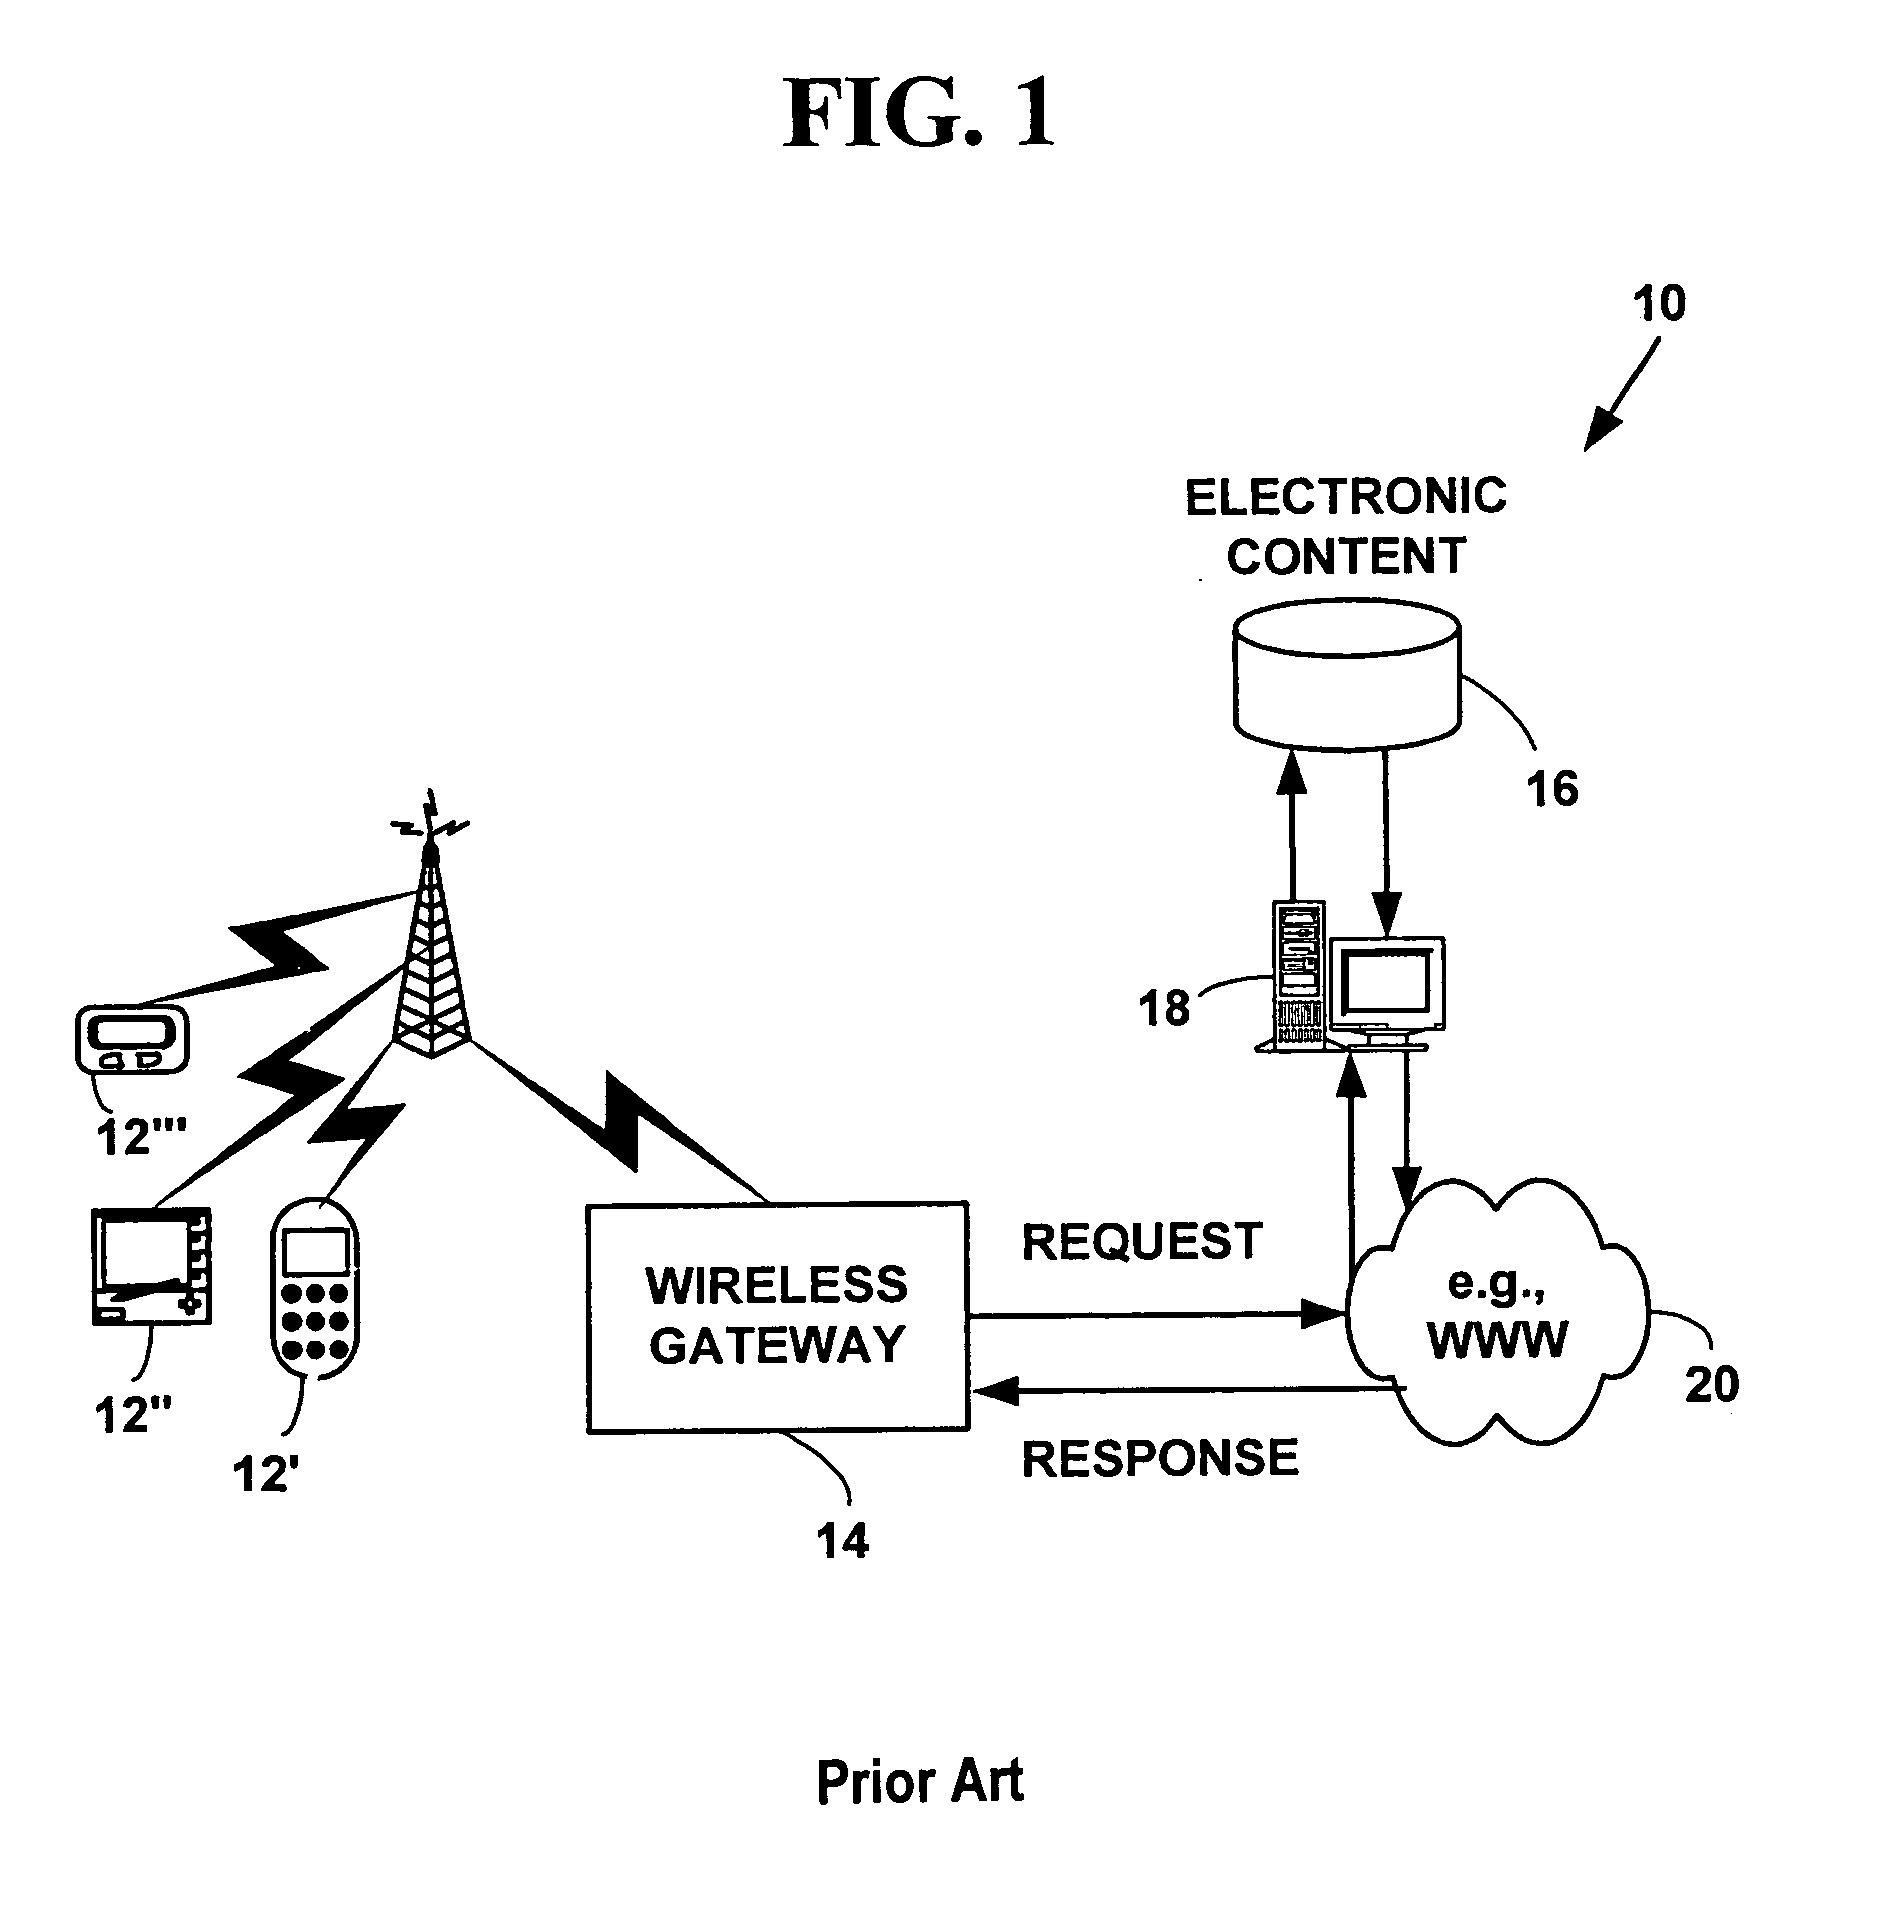 Method and system for accessing a universal message handler on a mobile device